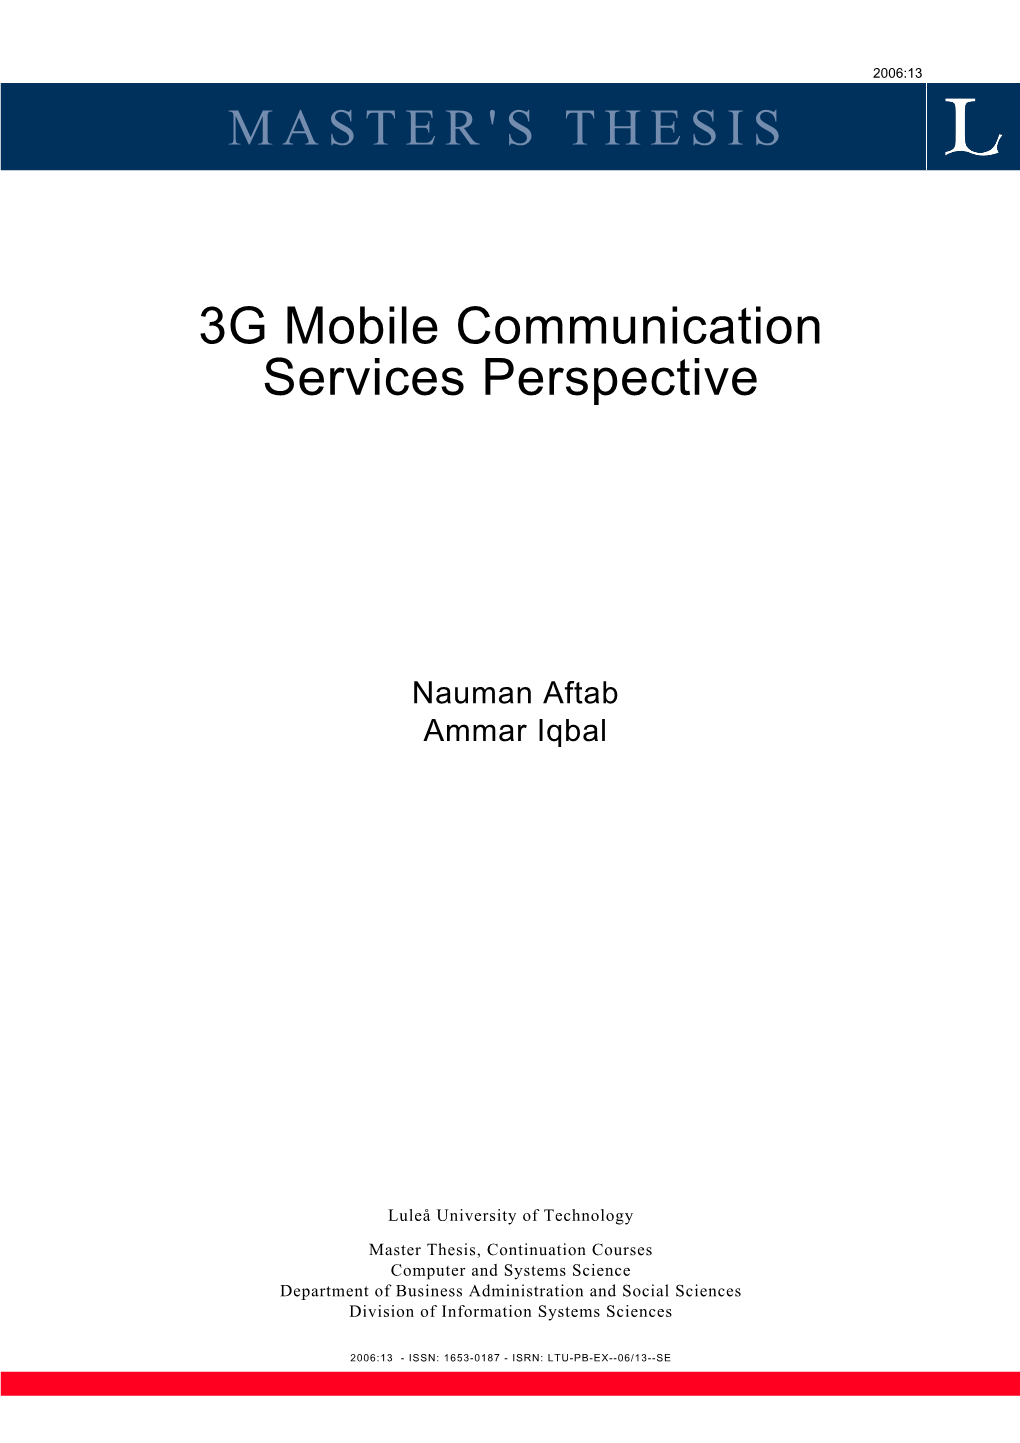 3G Mobile Communication Services Perspective